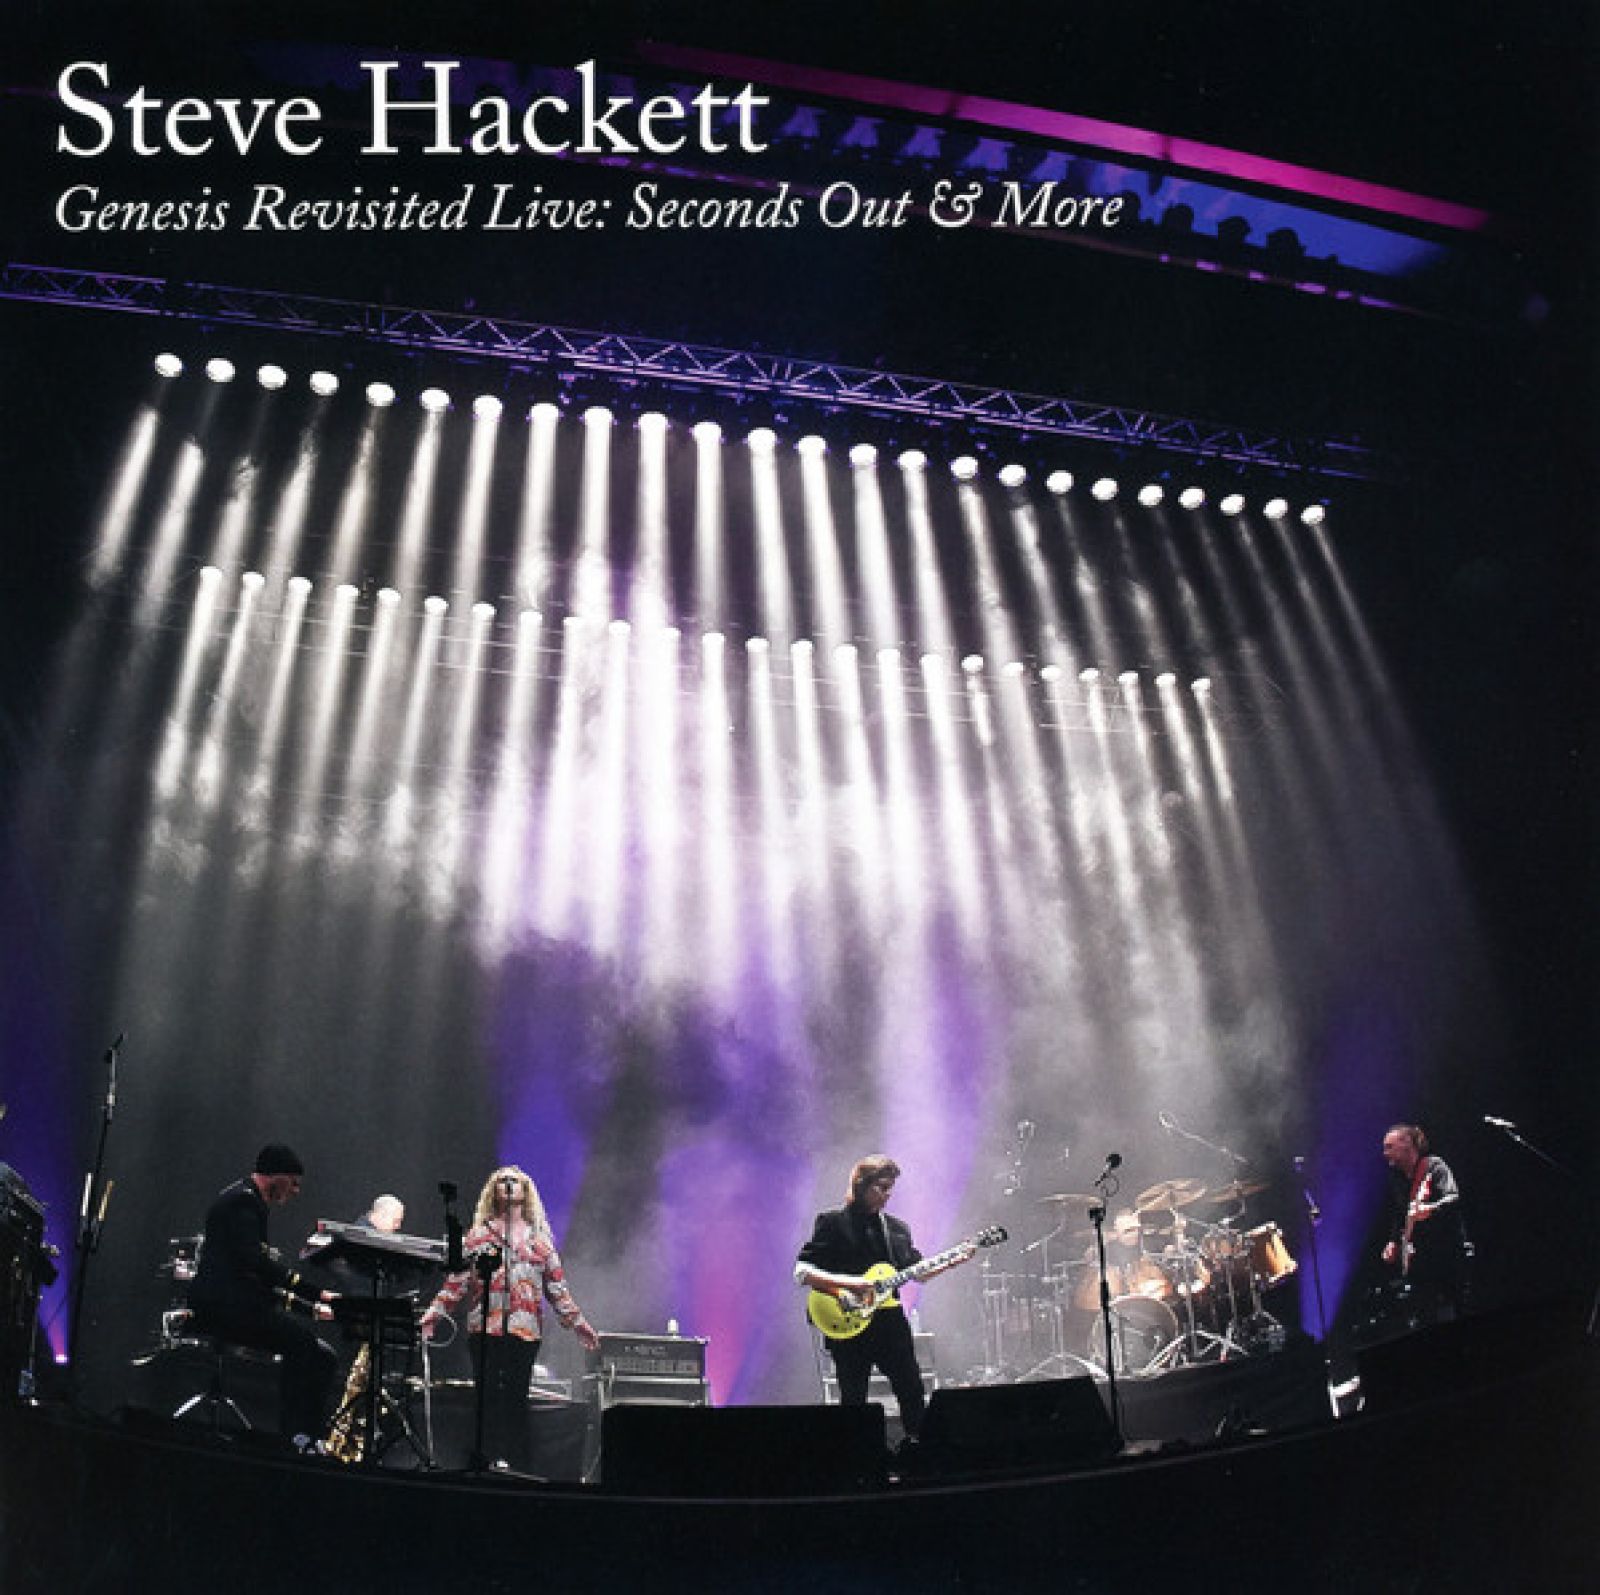 Виниловая пластинка Hackett, Steve, Genesis Revisited Live: Seconds Out & More (Box) (0194399984116) hackett steve виниловая пластинка hackett steve genesis revisited live seconds out